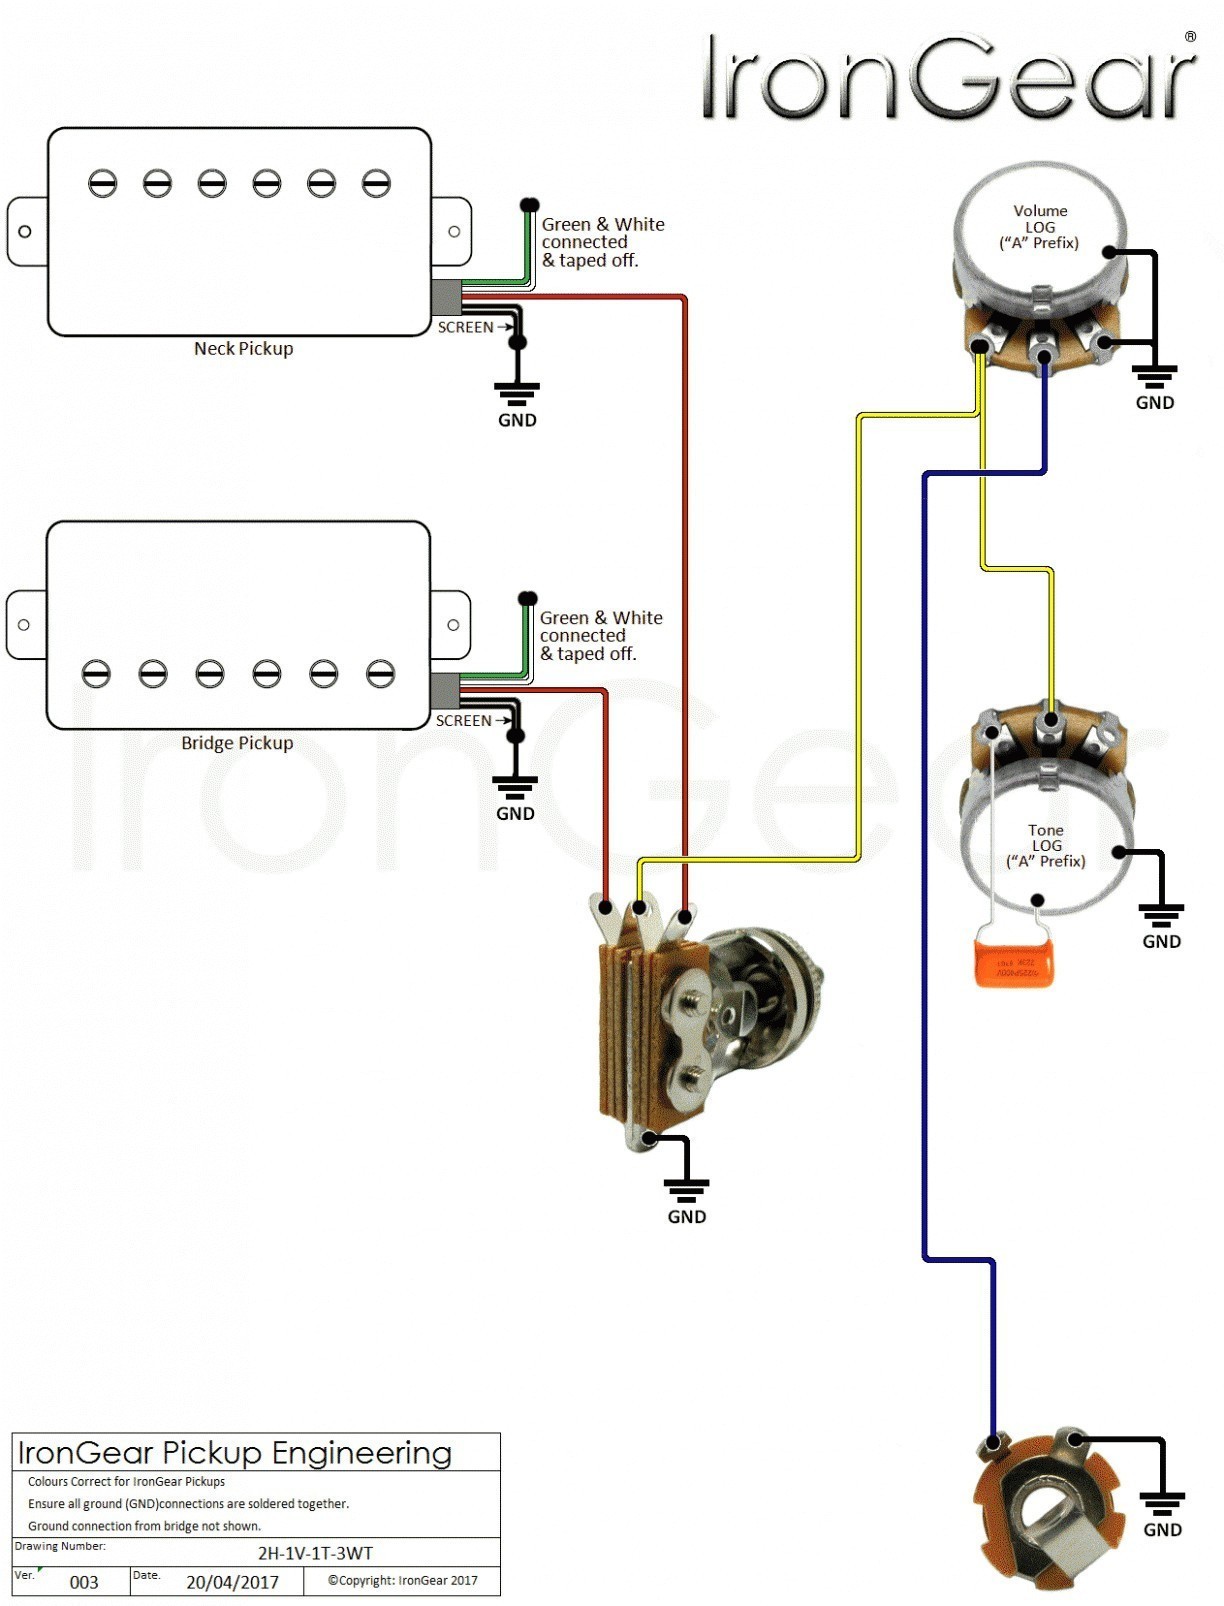 Wiring Diagram for A Les Paul Guitar New Gibson Sg Guitar Wiring Diagram Save Wiring Diagram